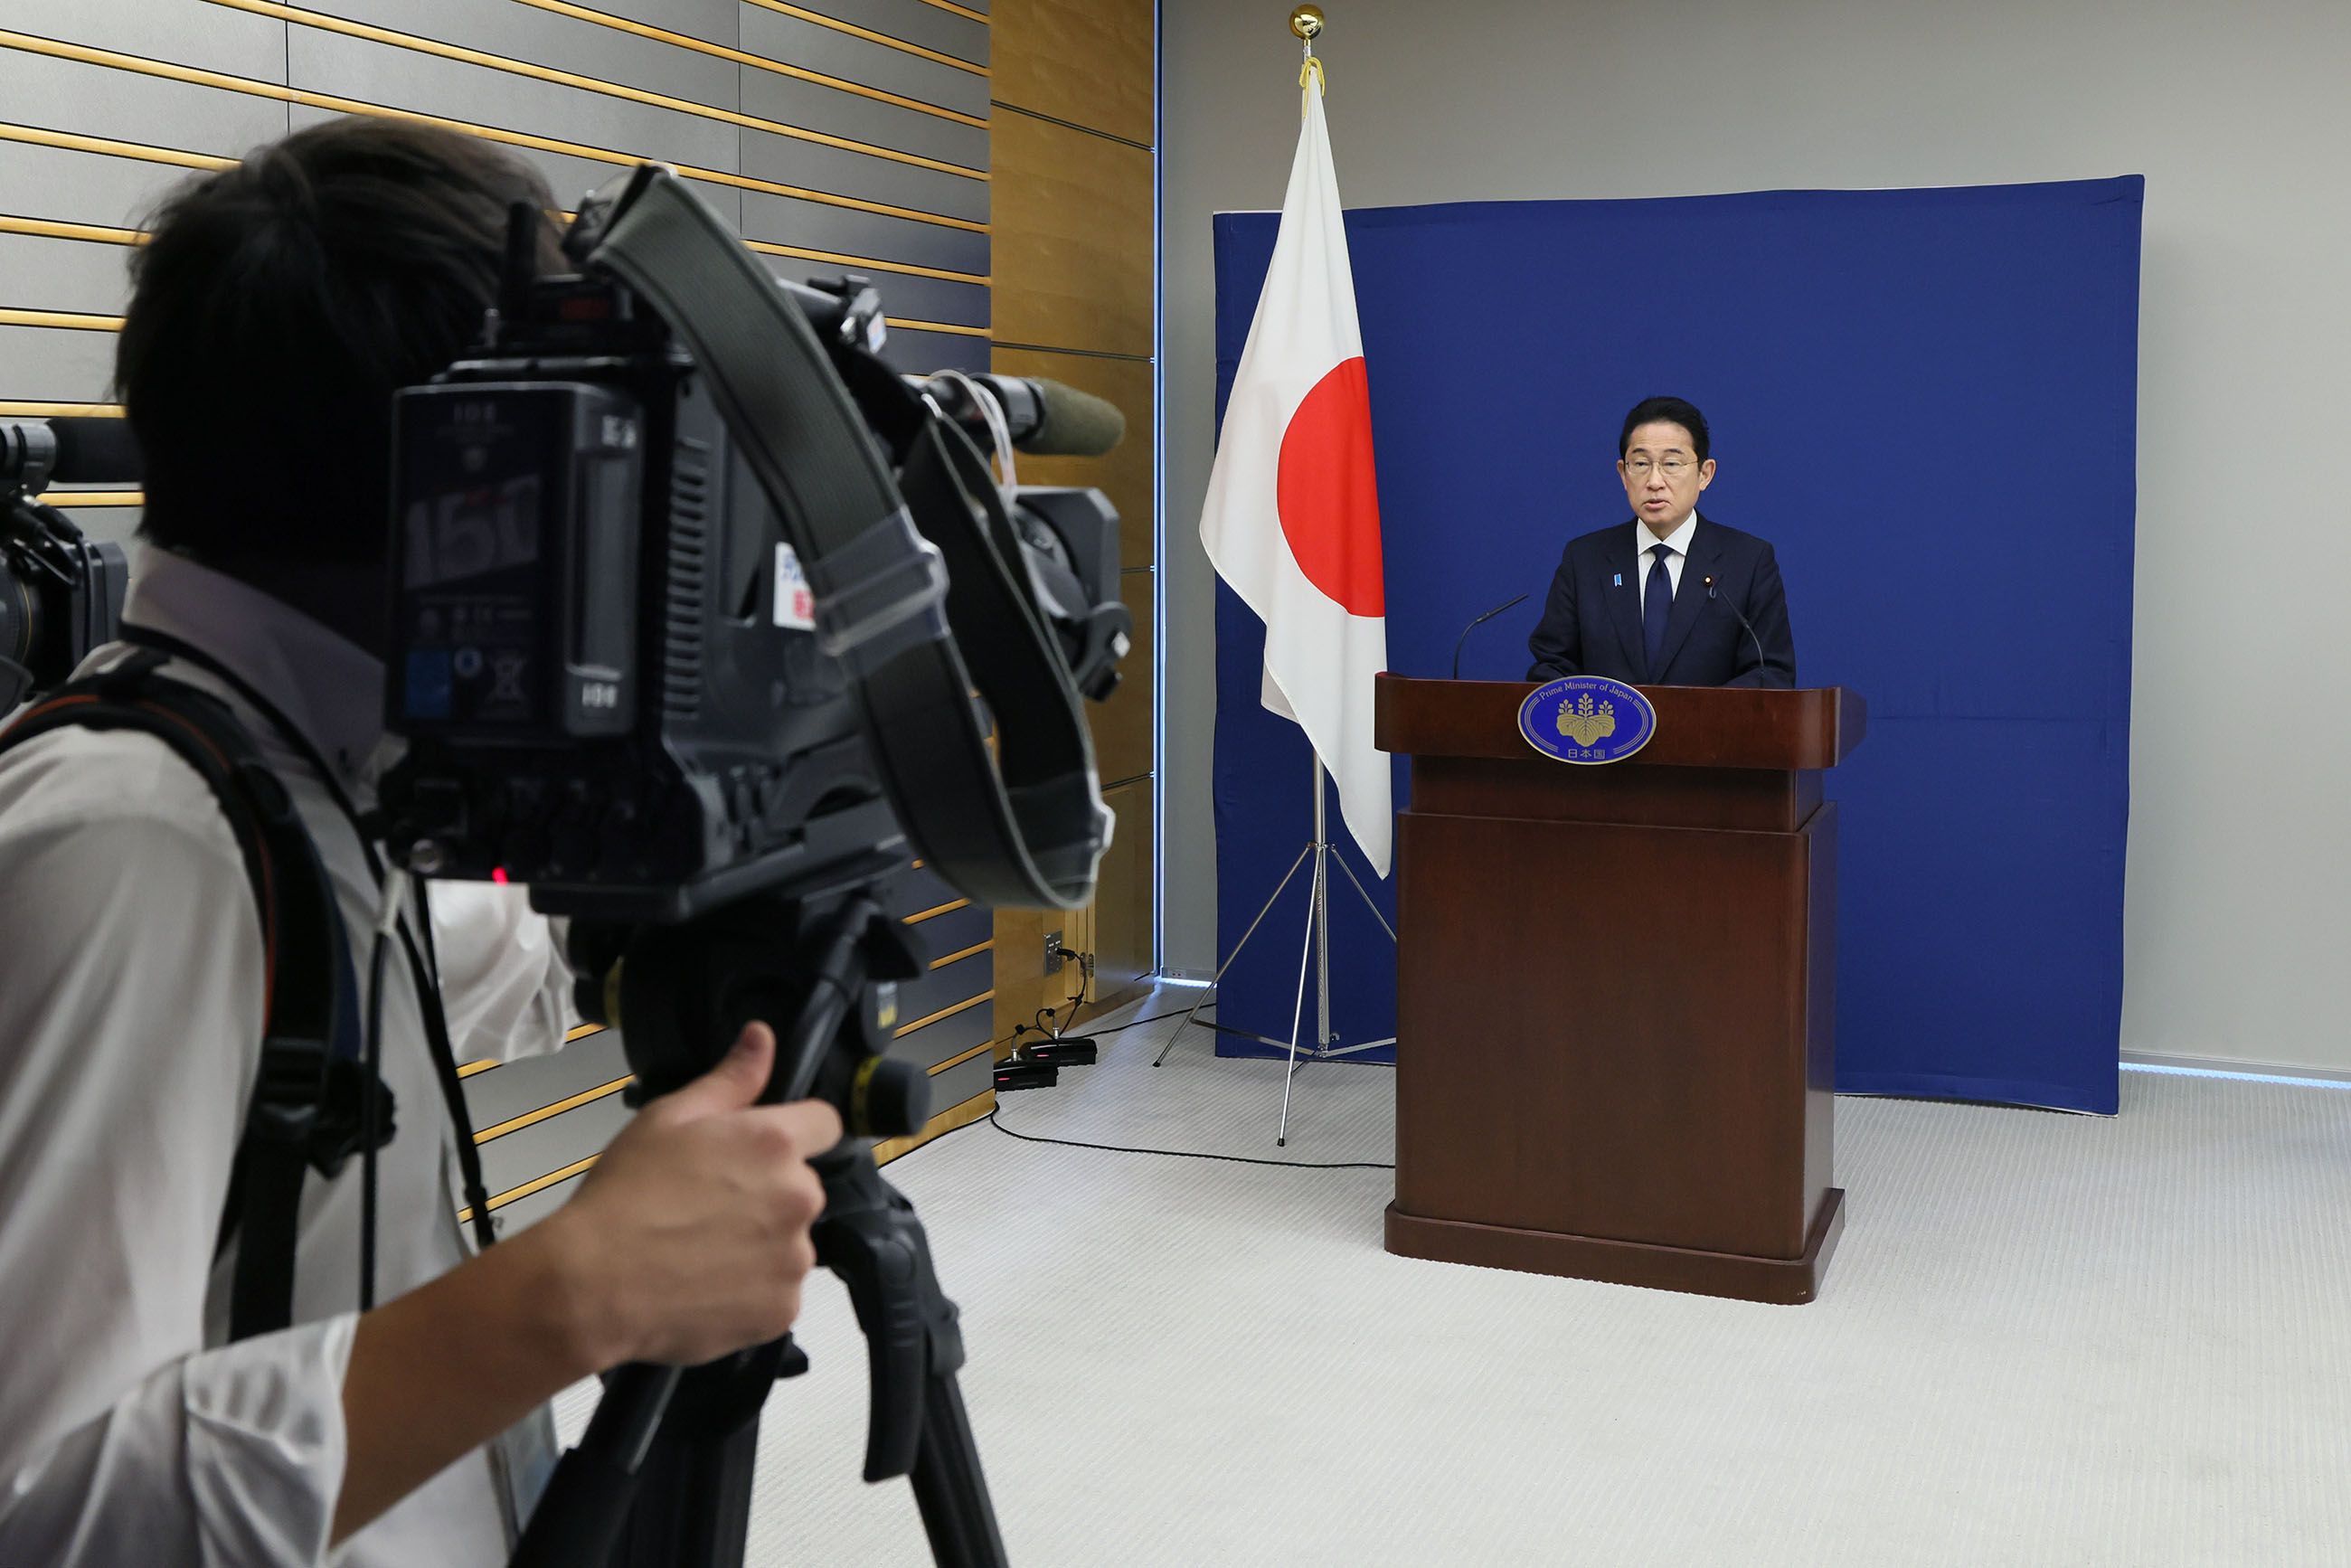 Prime Minister Kishida holding a press conference as a part of the exercise (2)